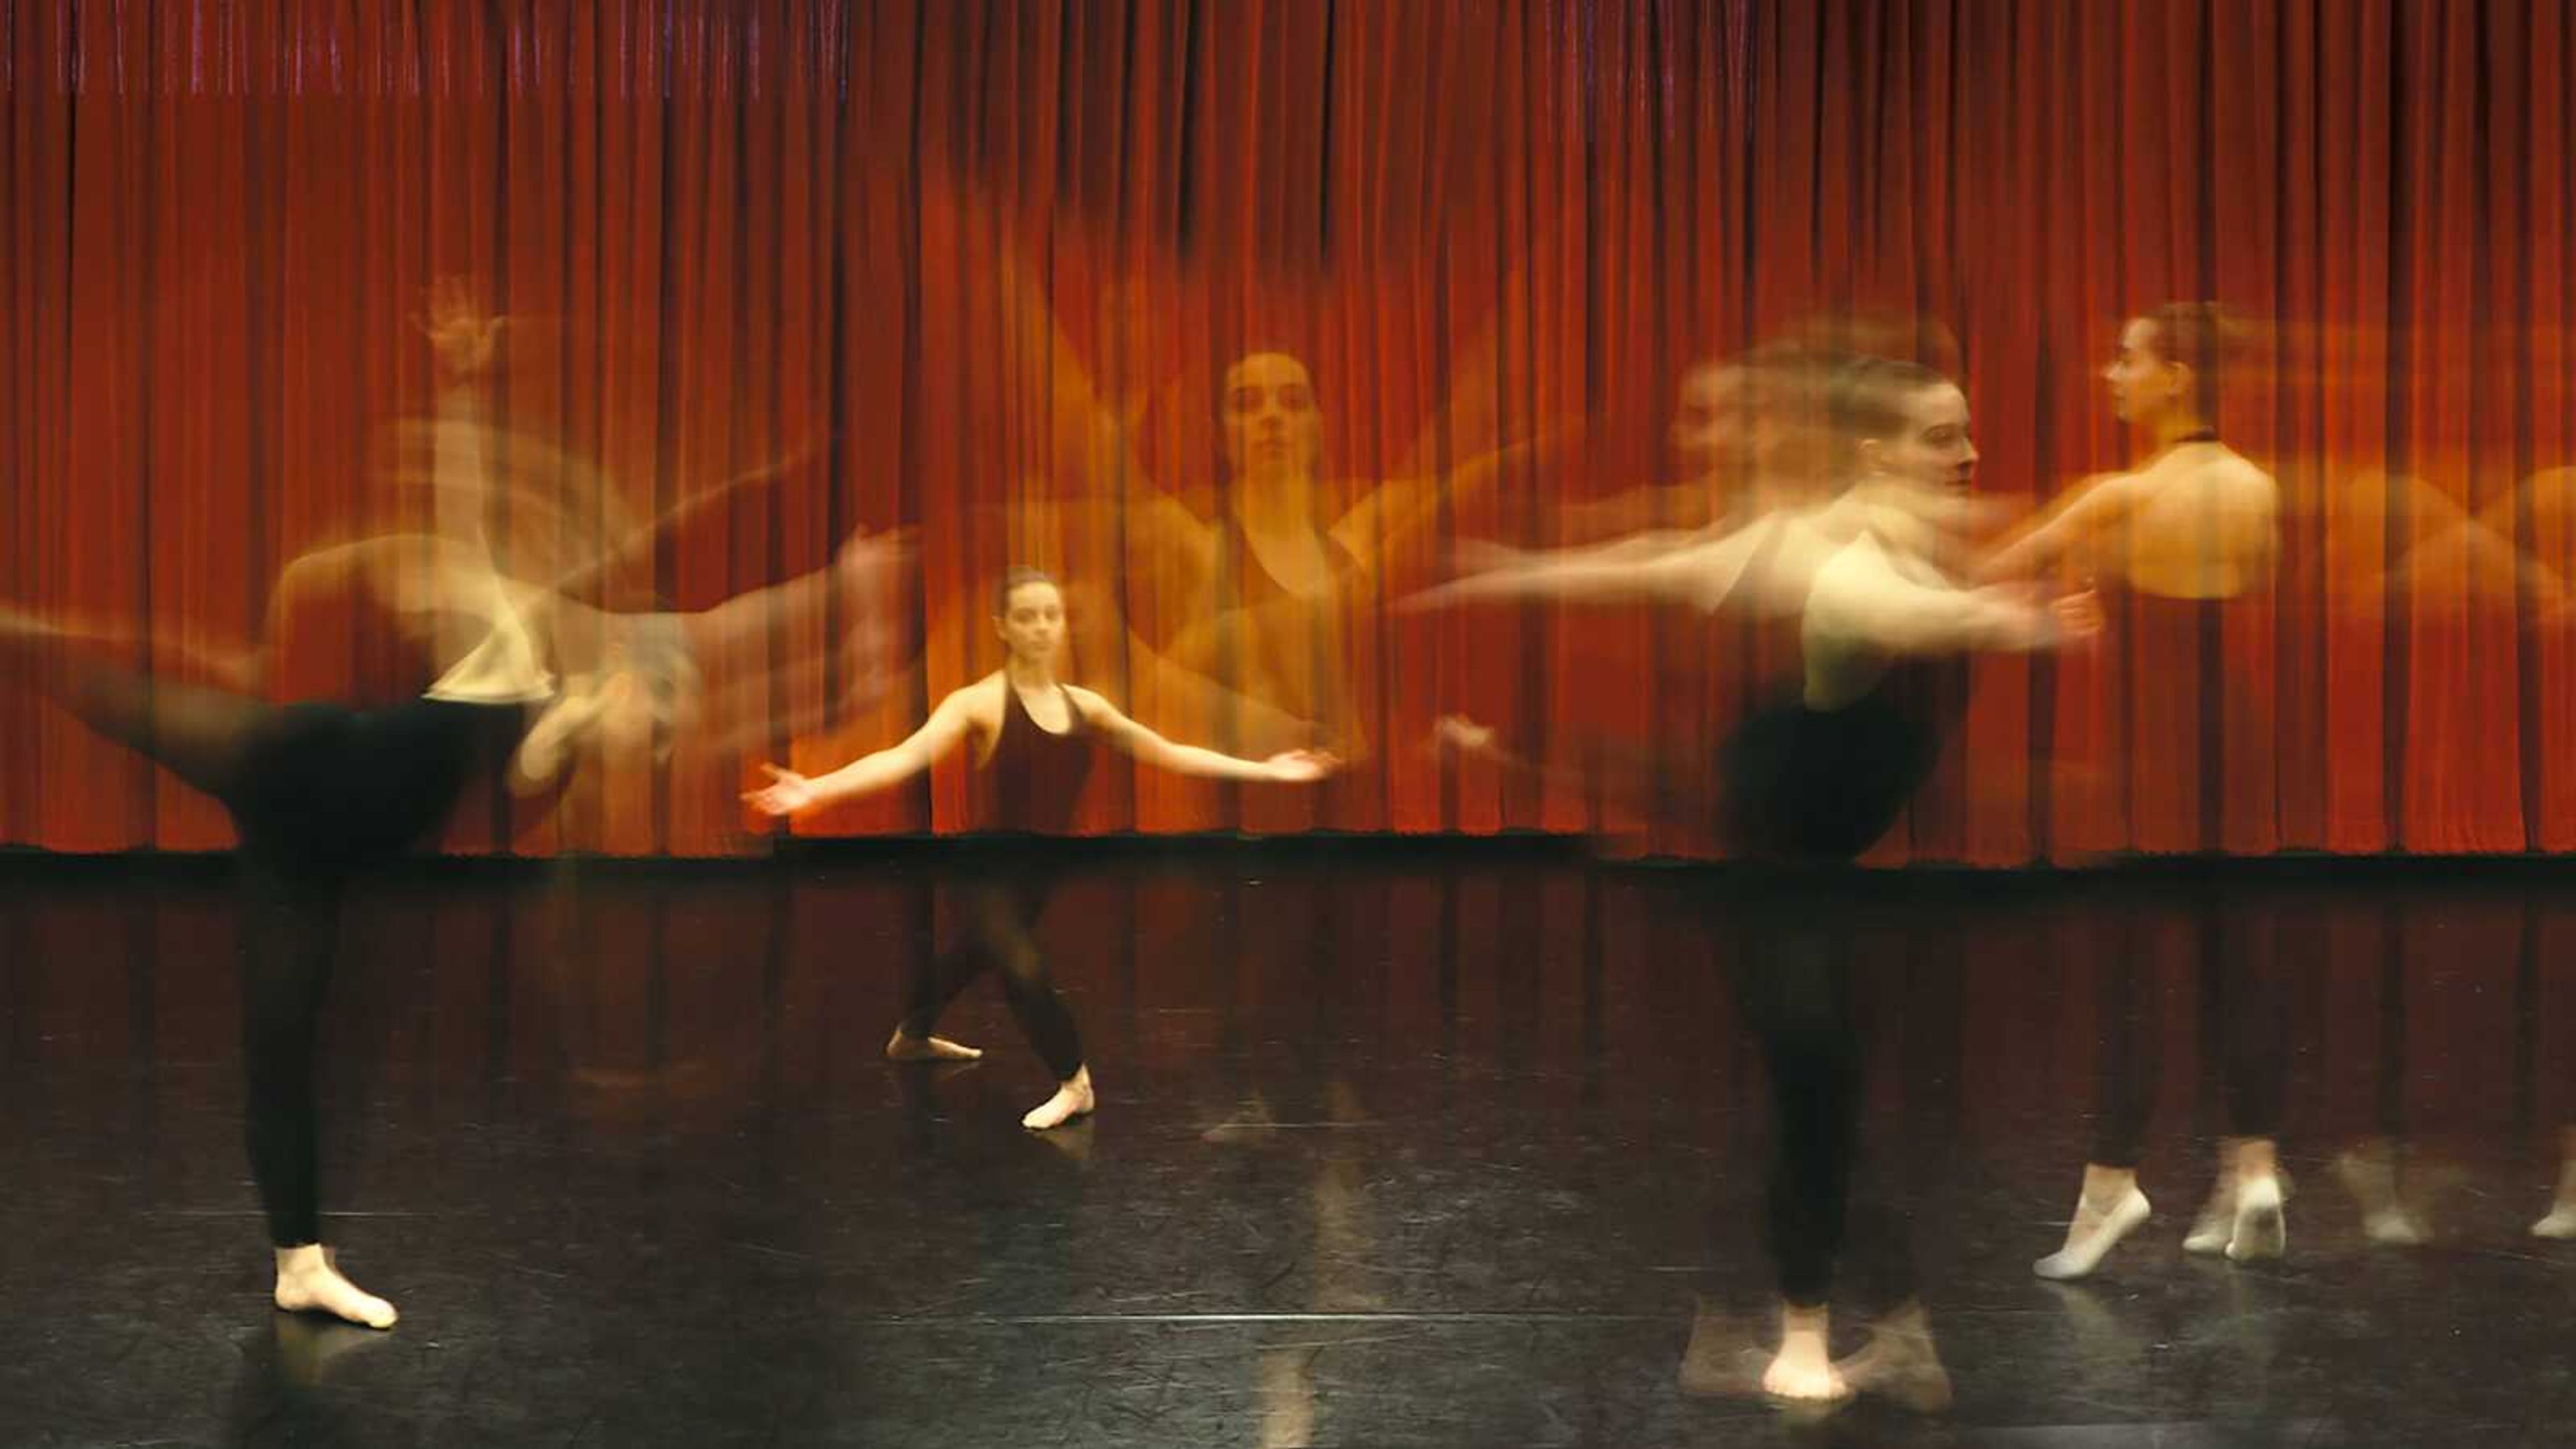 Perpetual motion, a dancer’s approach to physics